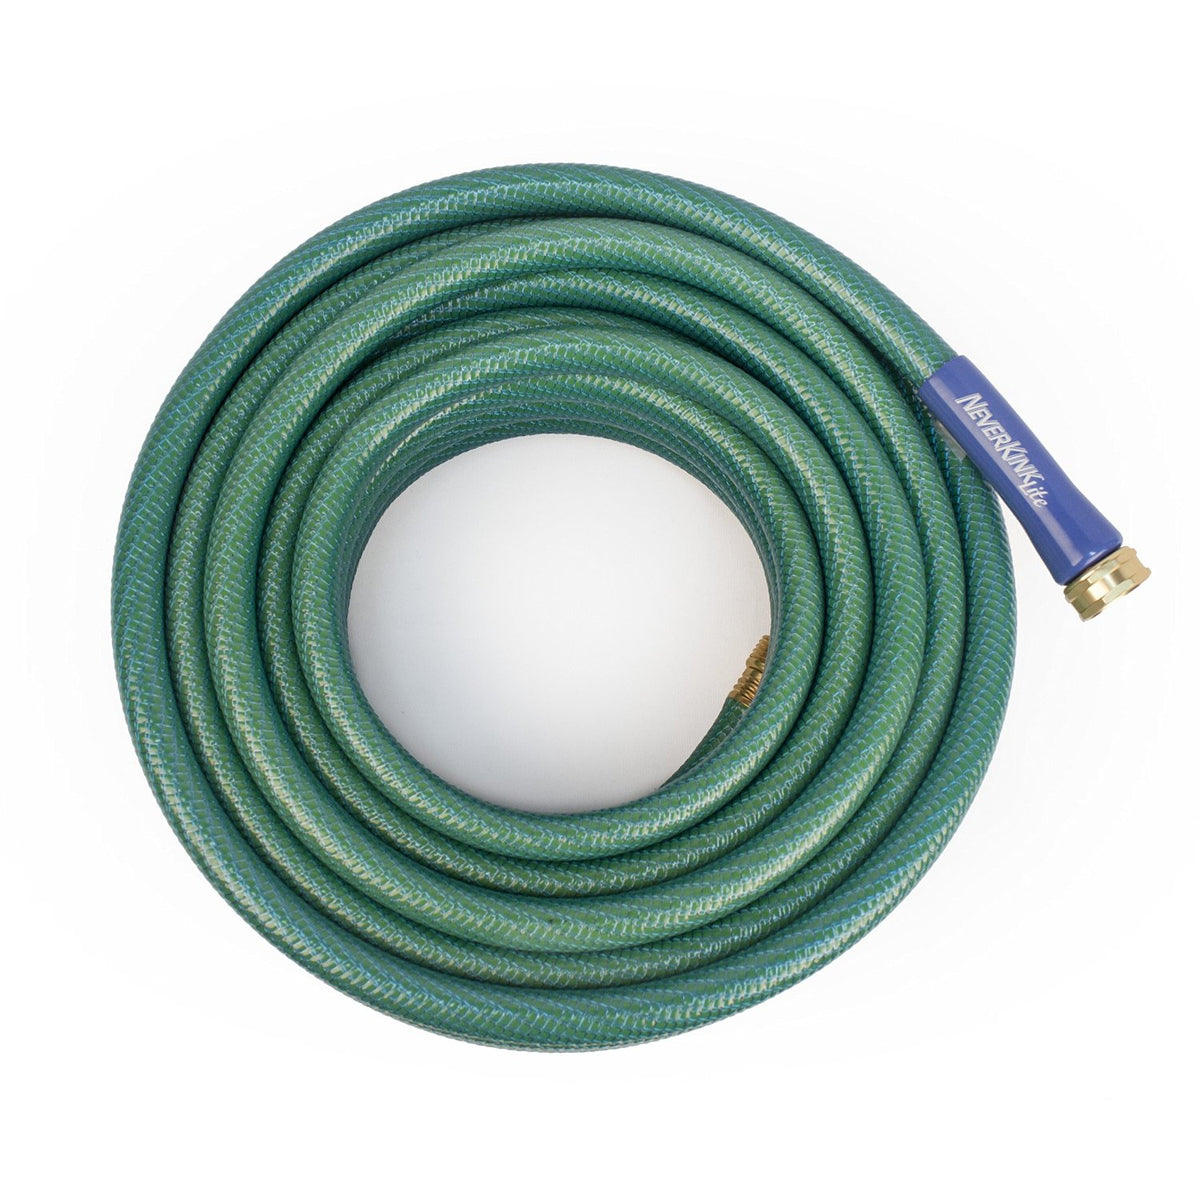 buy garden hose & accessories at cheap rate in bulk. wholesale & retail lawn & plant care sprayers store.